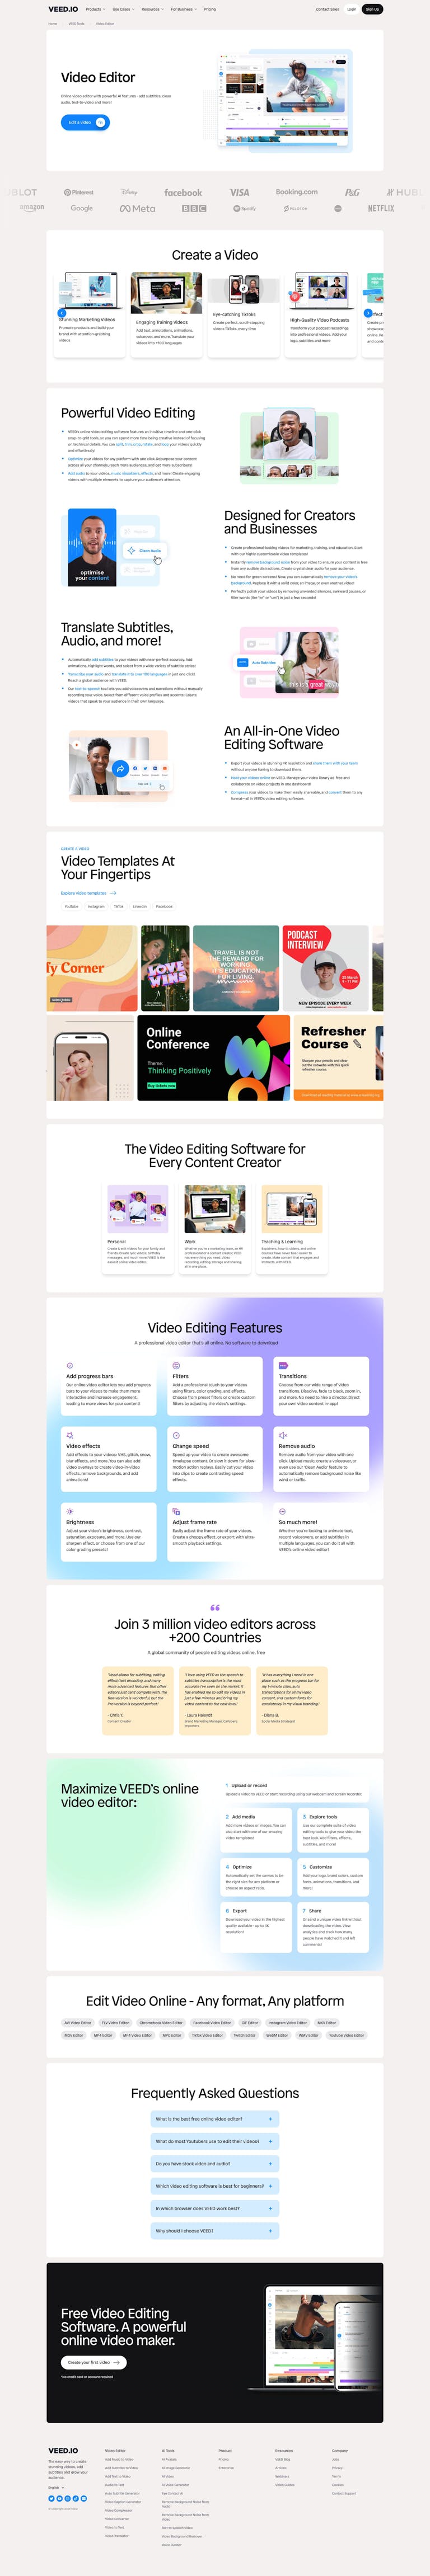 Screenshot of Powerful Online Video Editor the All in One Professional Suite by VEED.IO